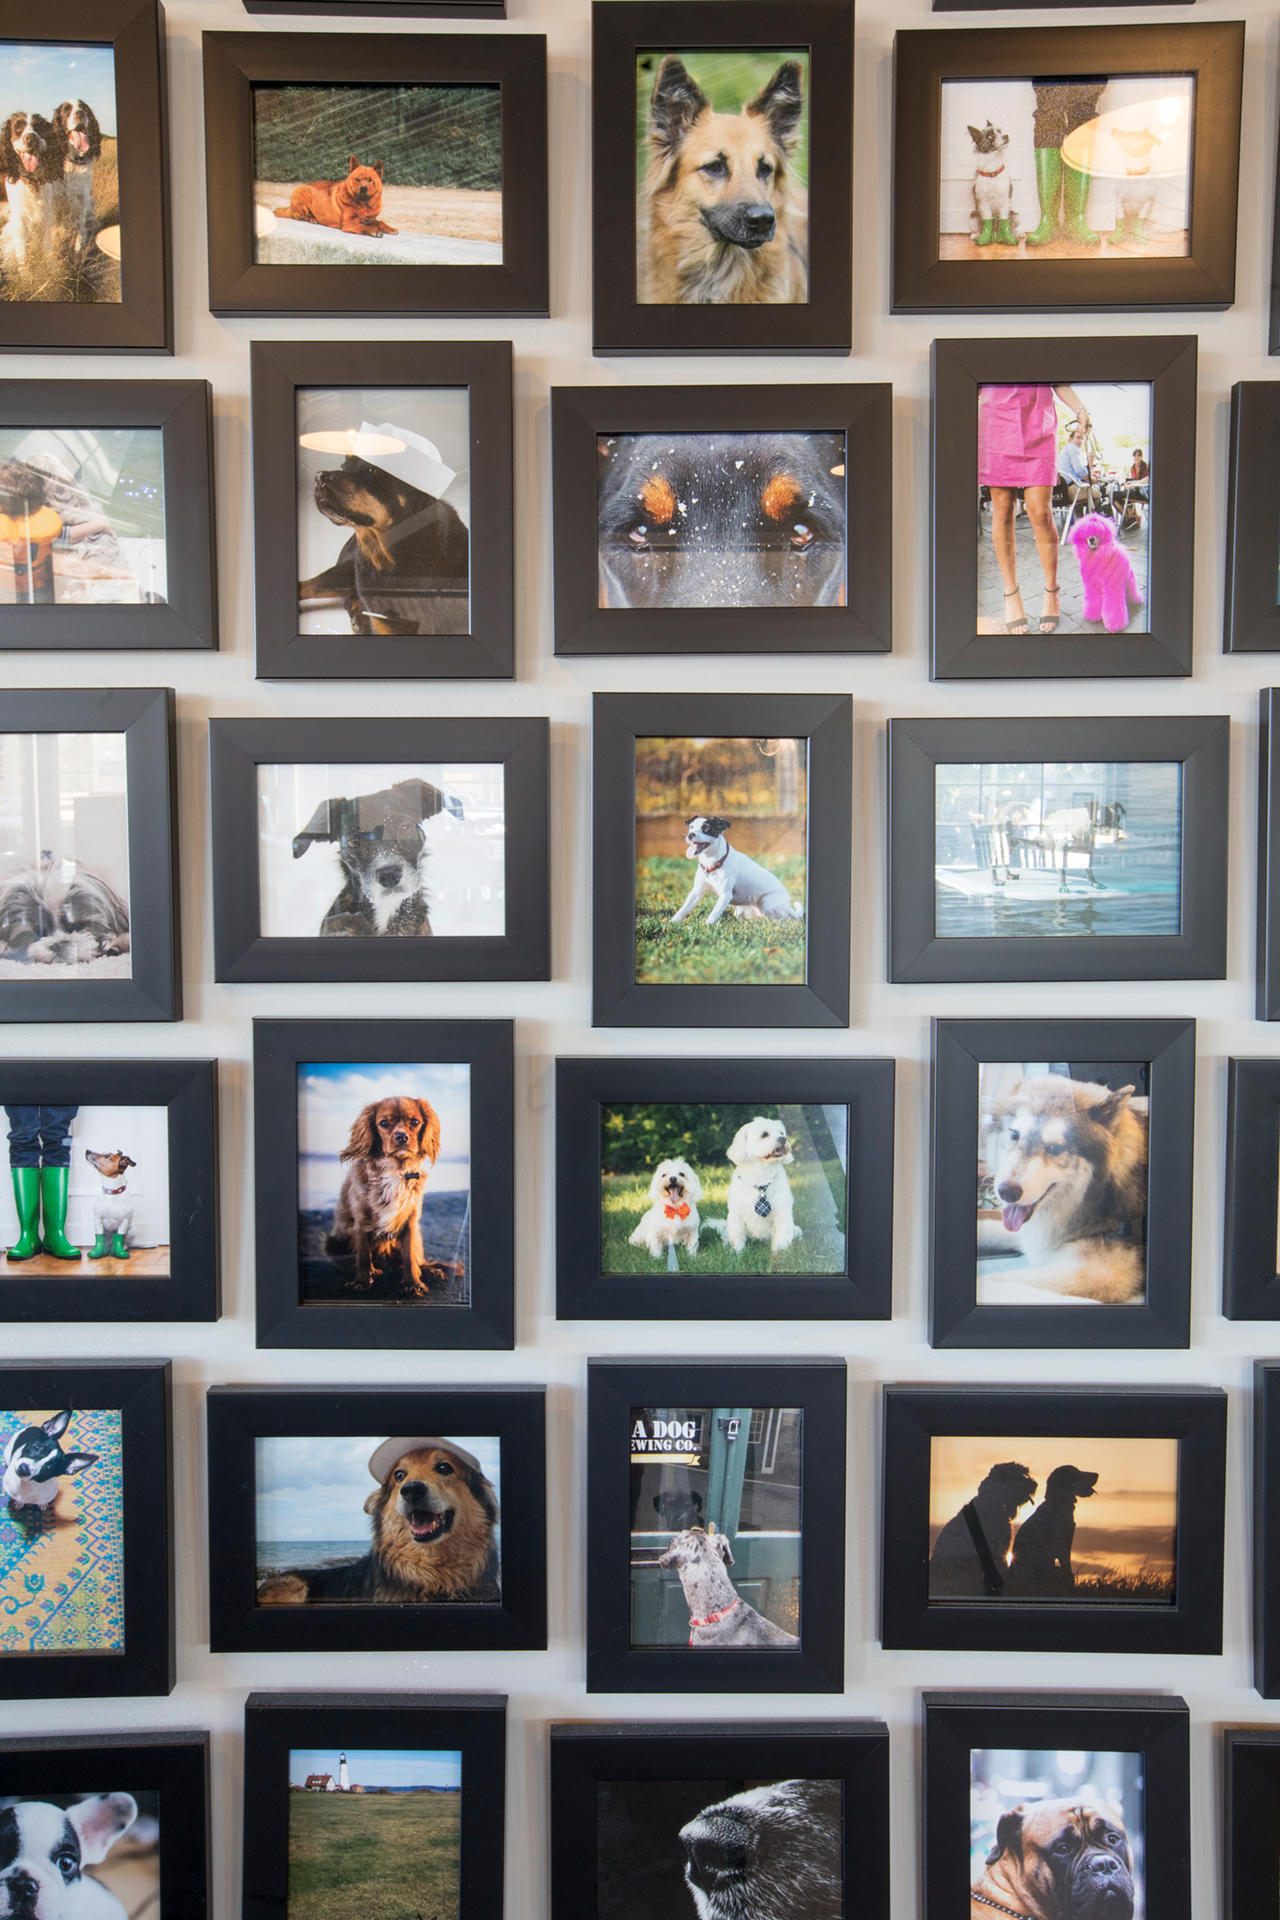 There's even a fun (and adorable) wall of framed dog photos.